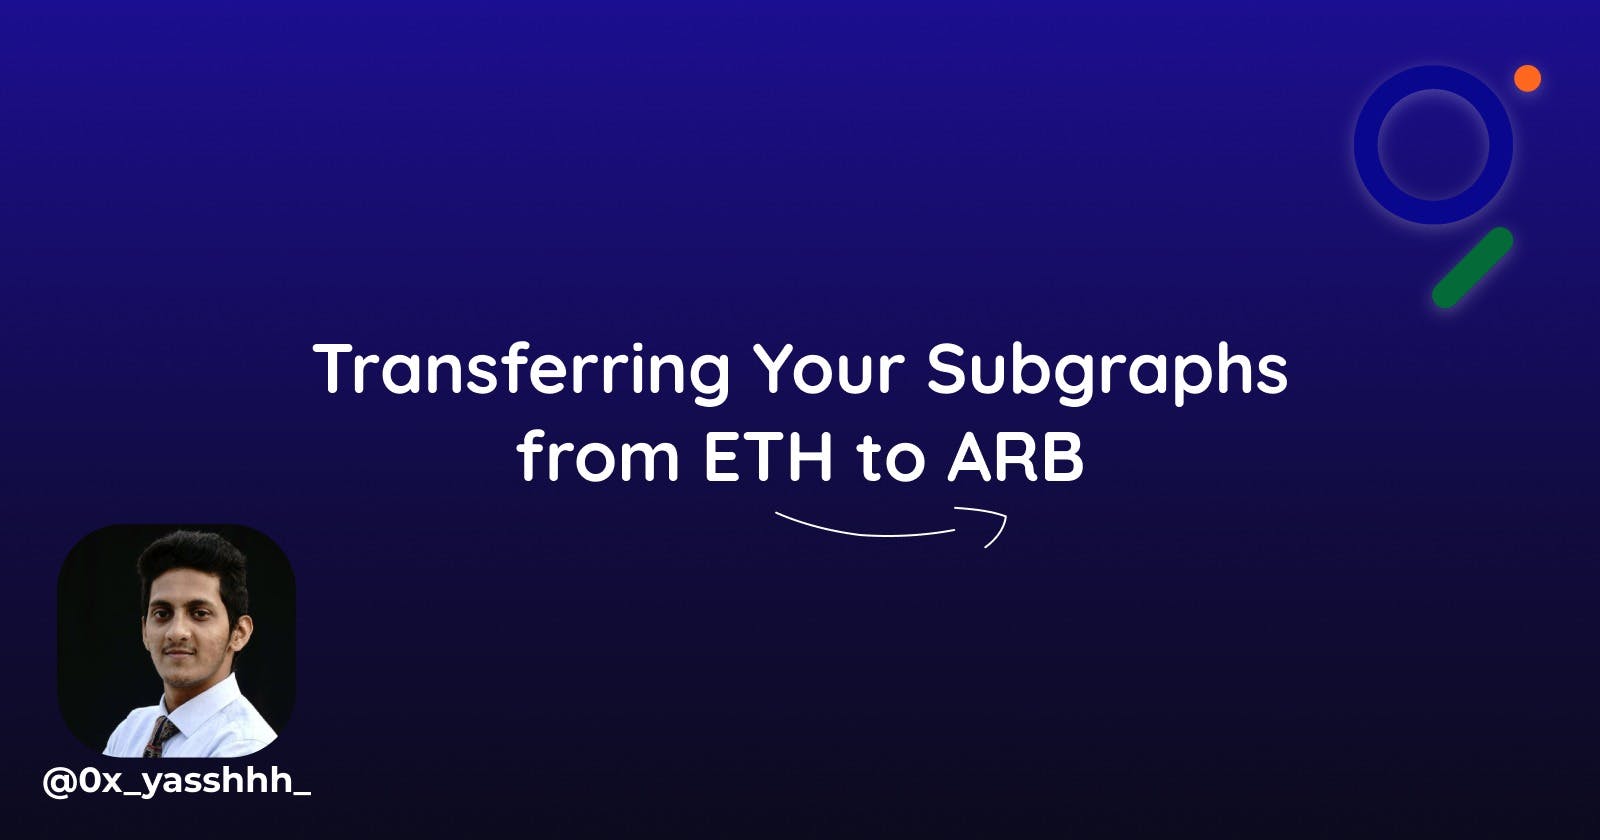 A Step-by-Step Guide to Transferring Subgraphs from Ethereum Mainnet to Arbitrum One